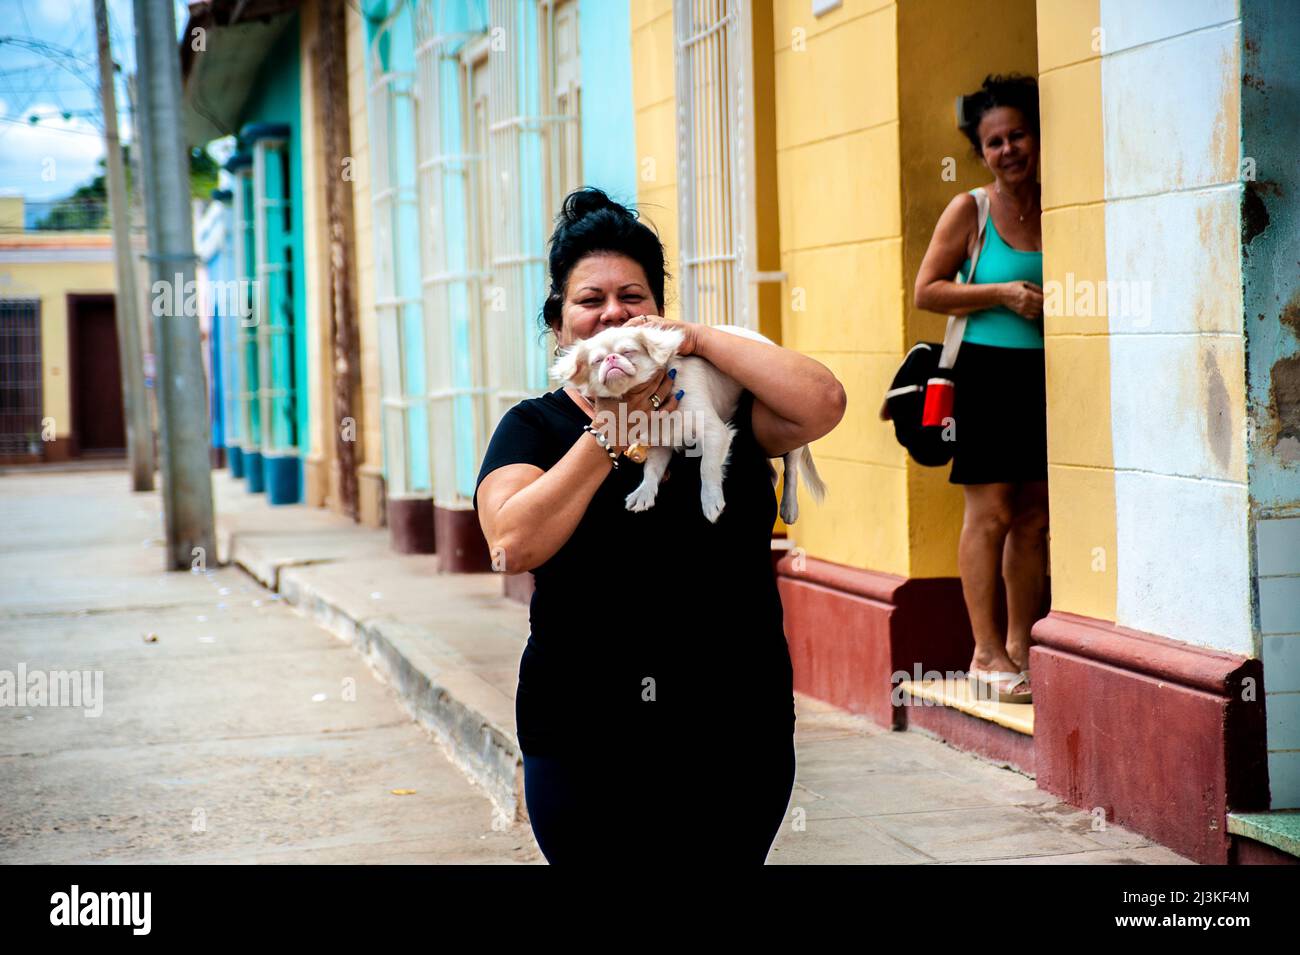 Woman holds and kisses her pet dog on a street in Trinidad, Cuba as her friend looks, smiles and laughs. Stock Photo